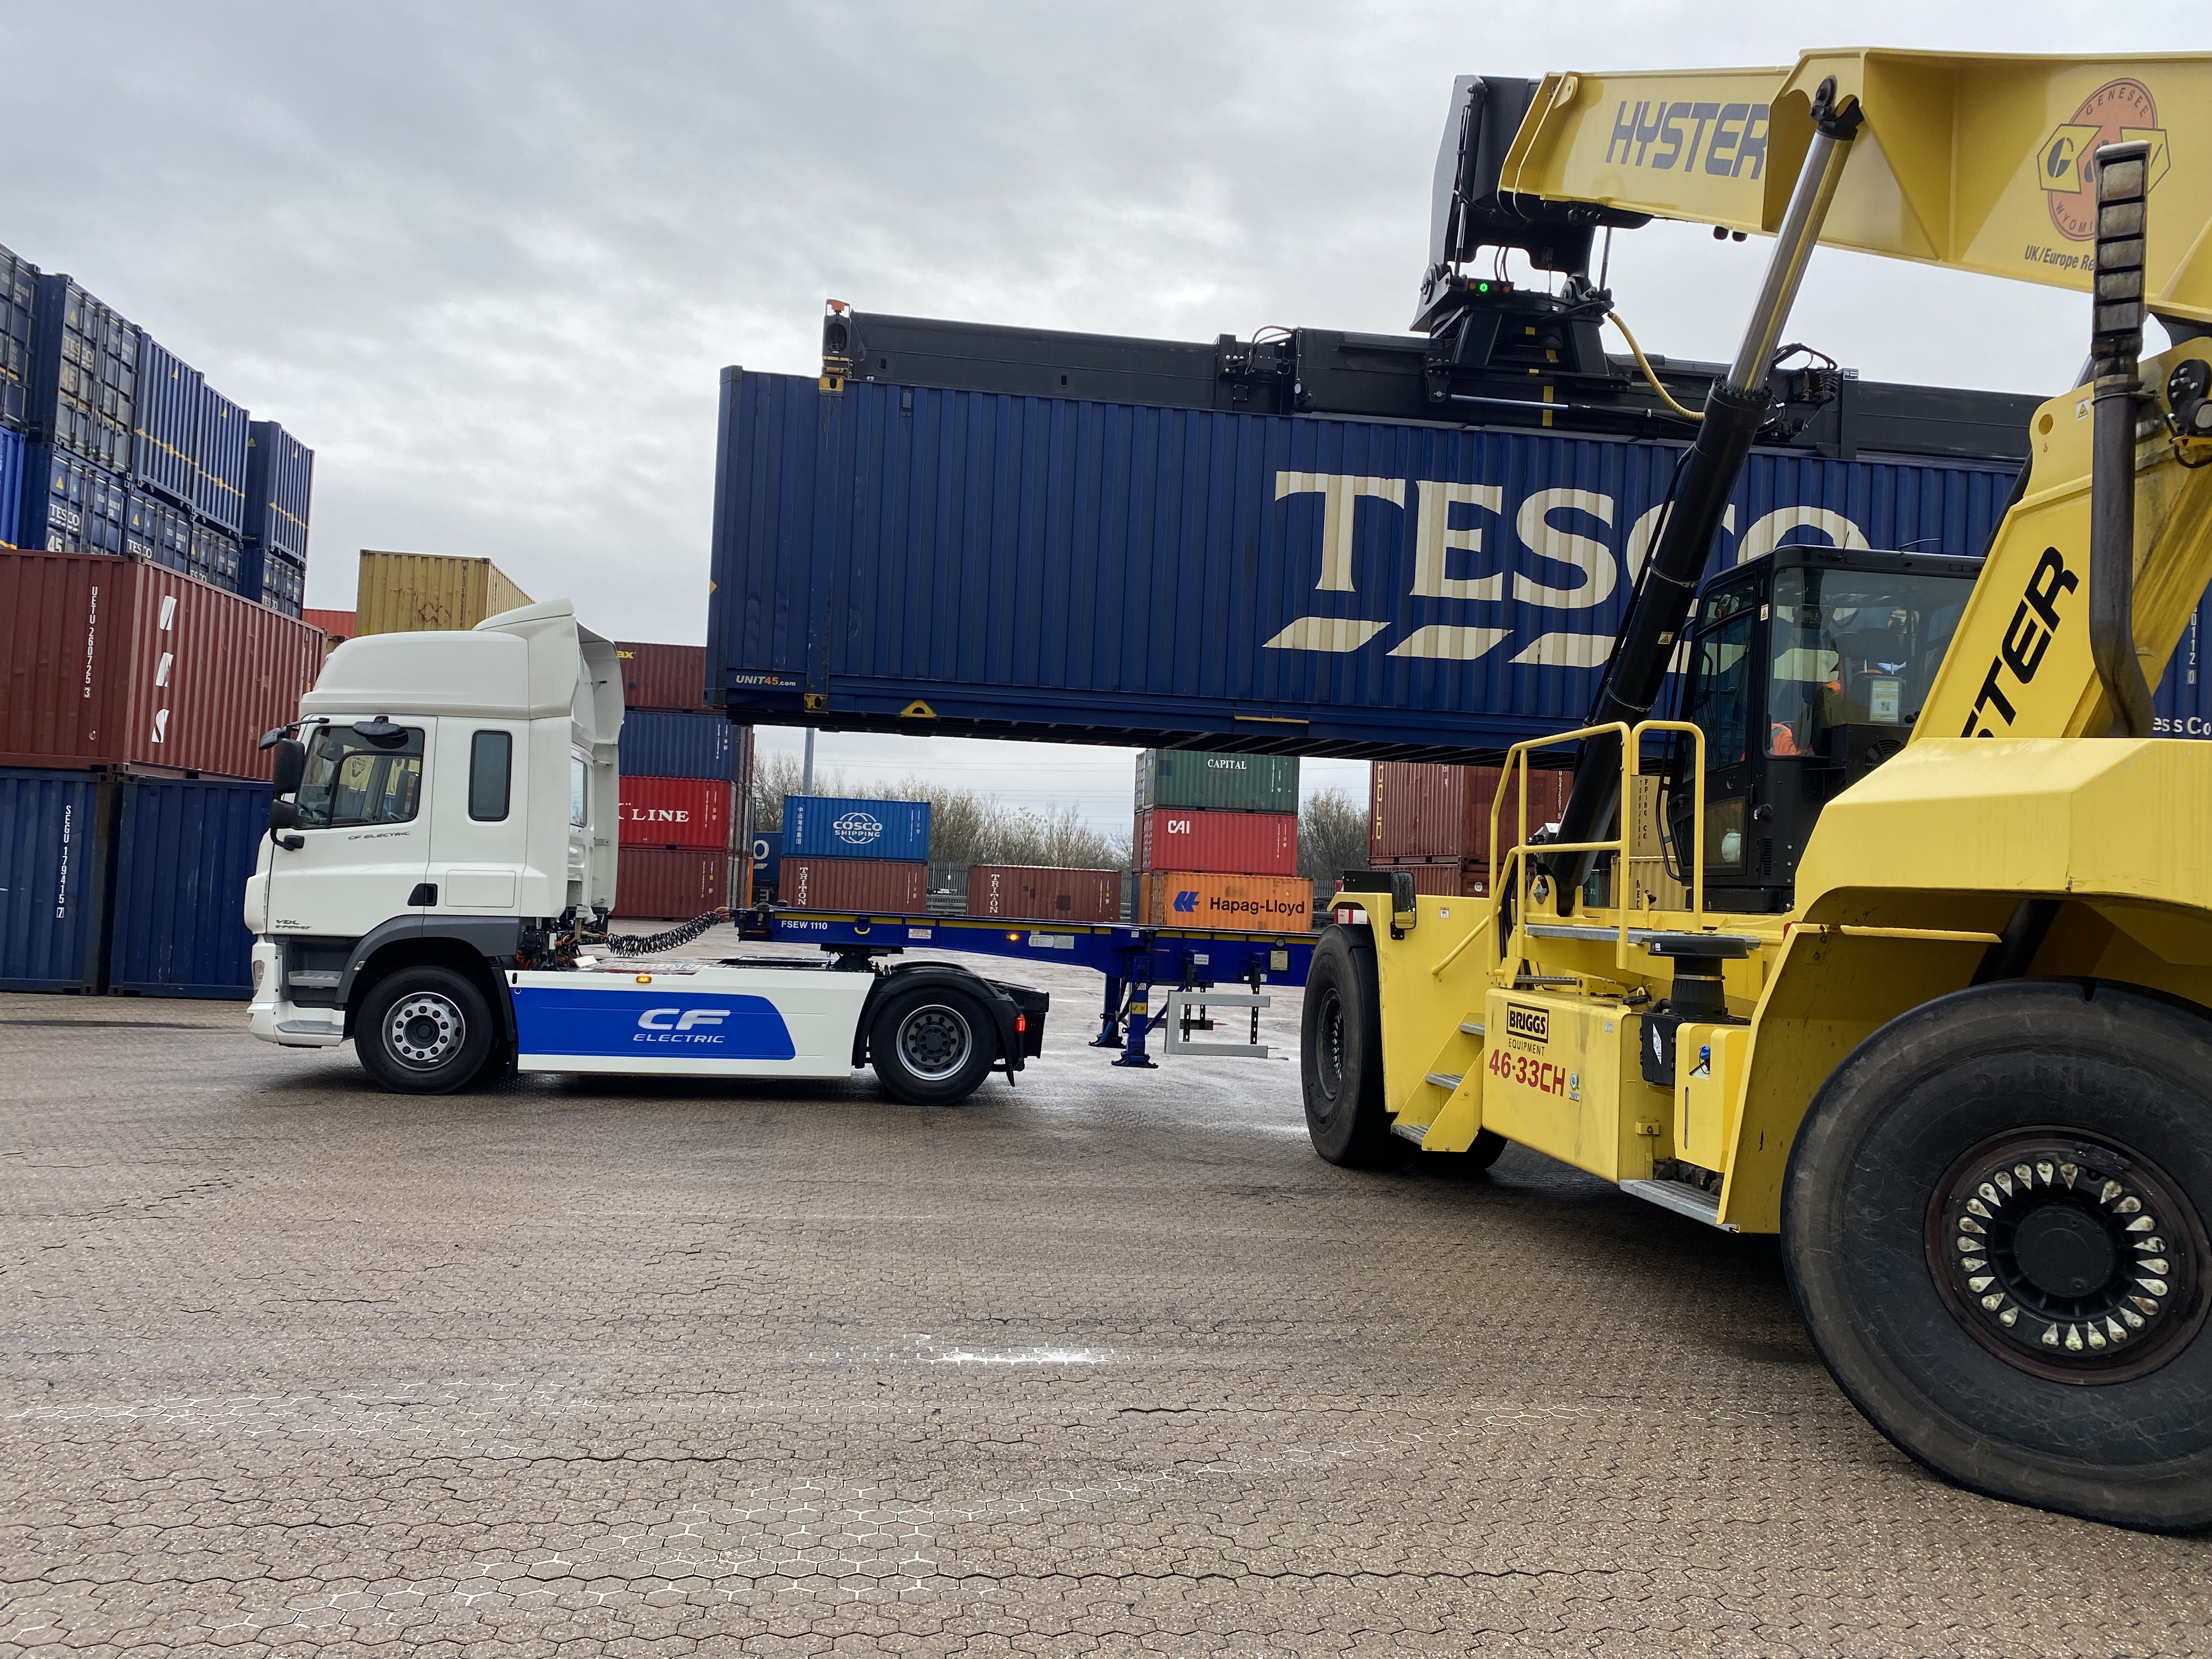 Rapid Charge Ultrafast Charges UK's First Electric HGV